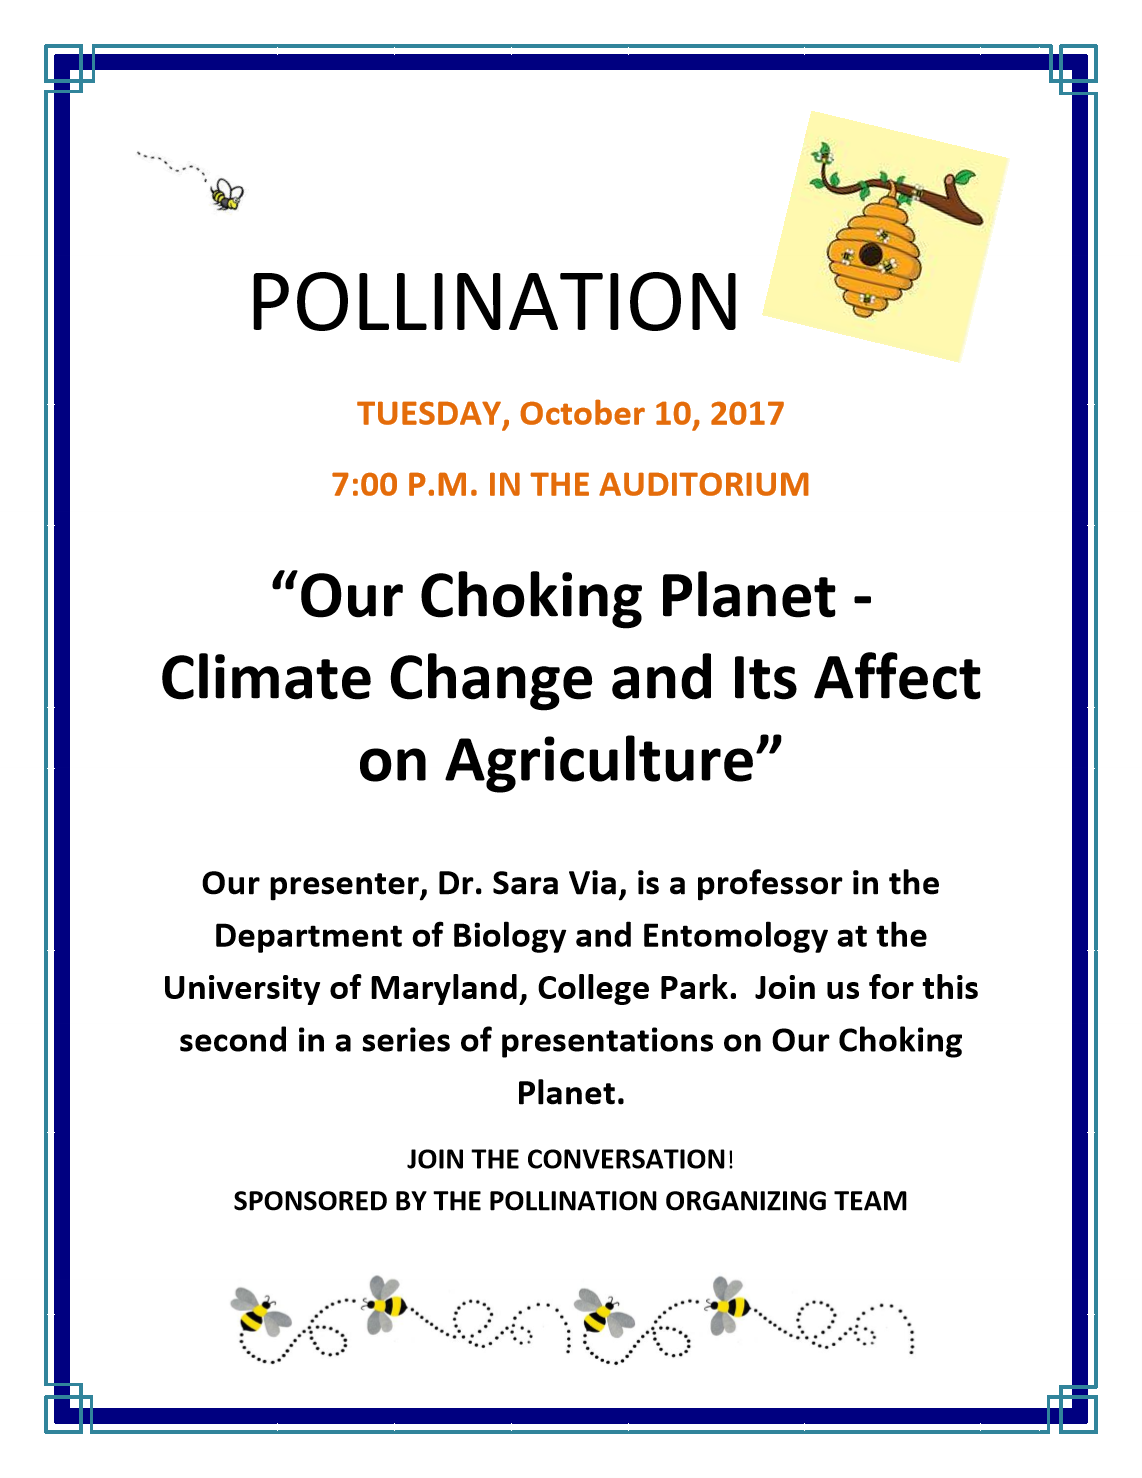 Pollination Committee: Our Choking Planet, Pt. 2, Tues. 10/10/17 7PM Auditorium